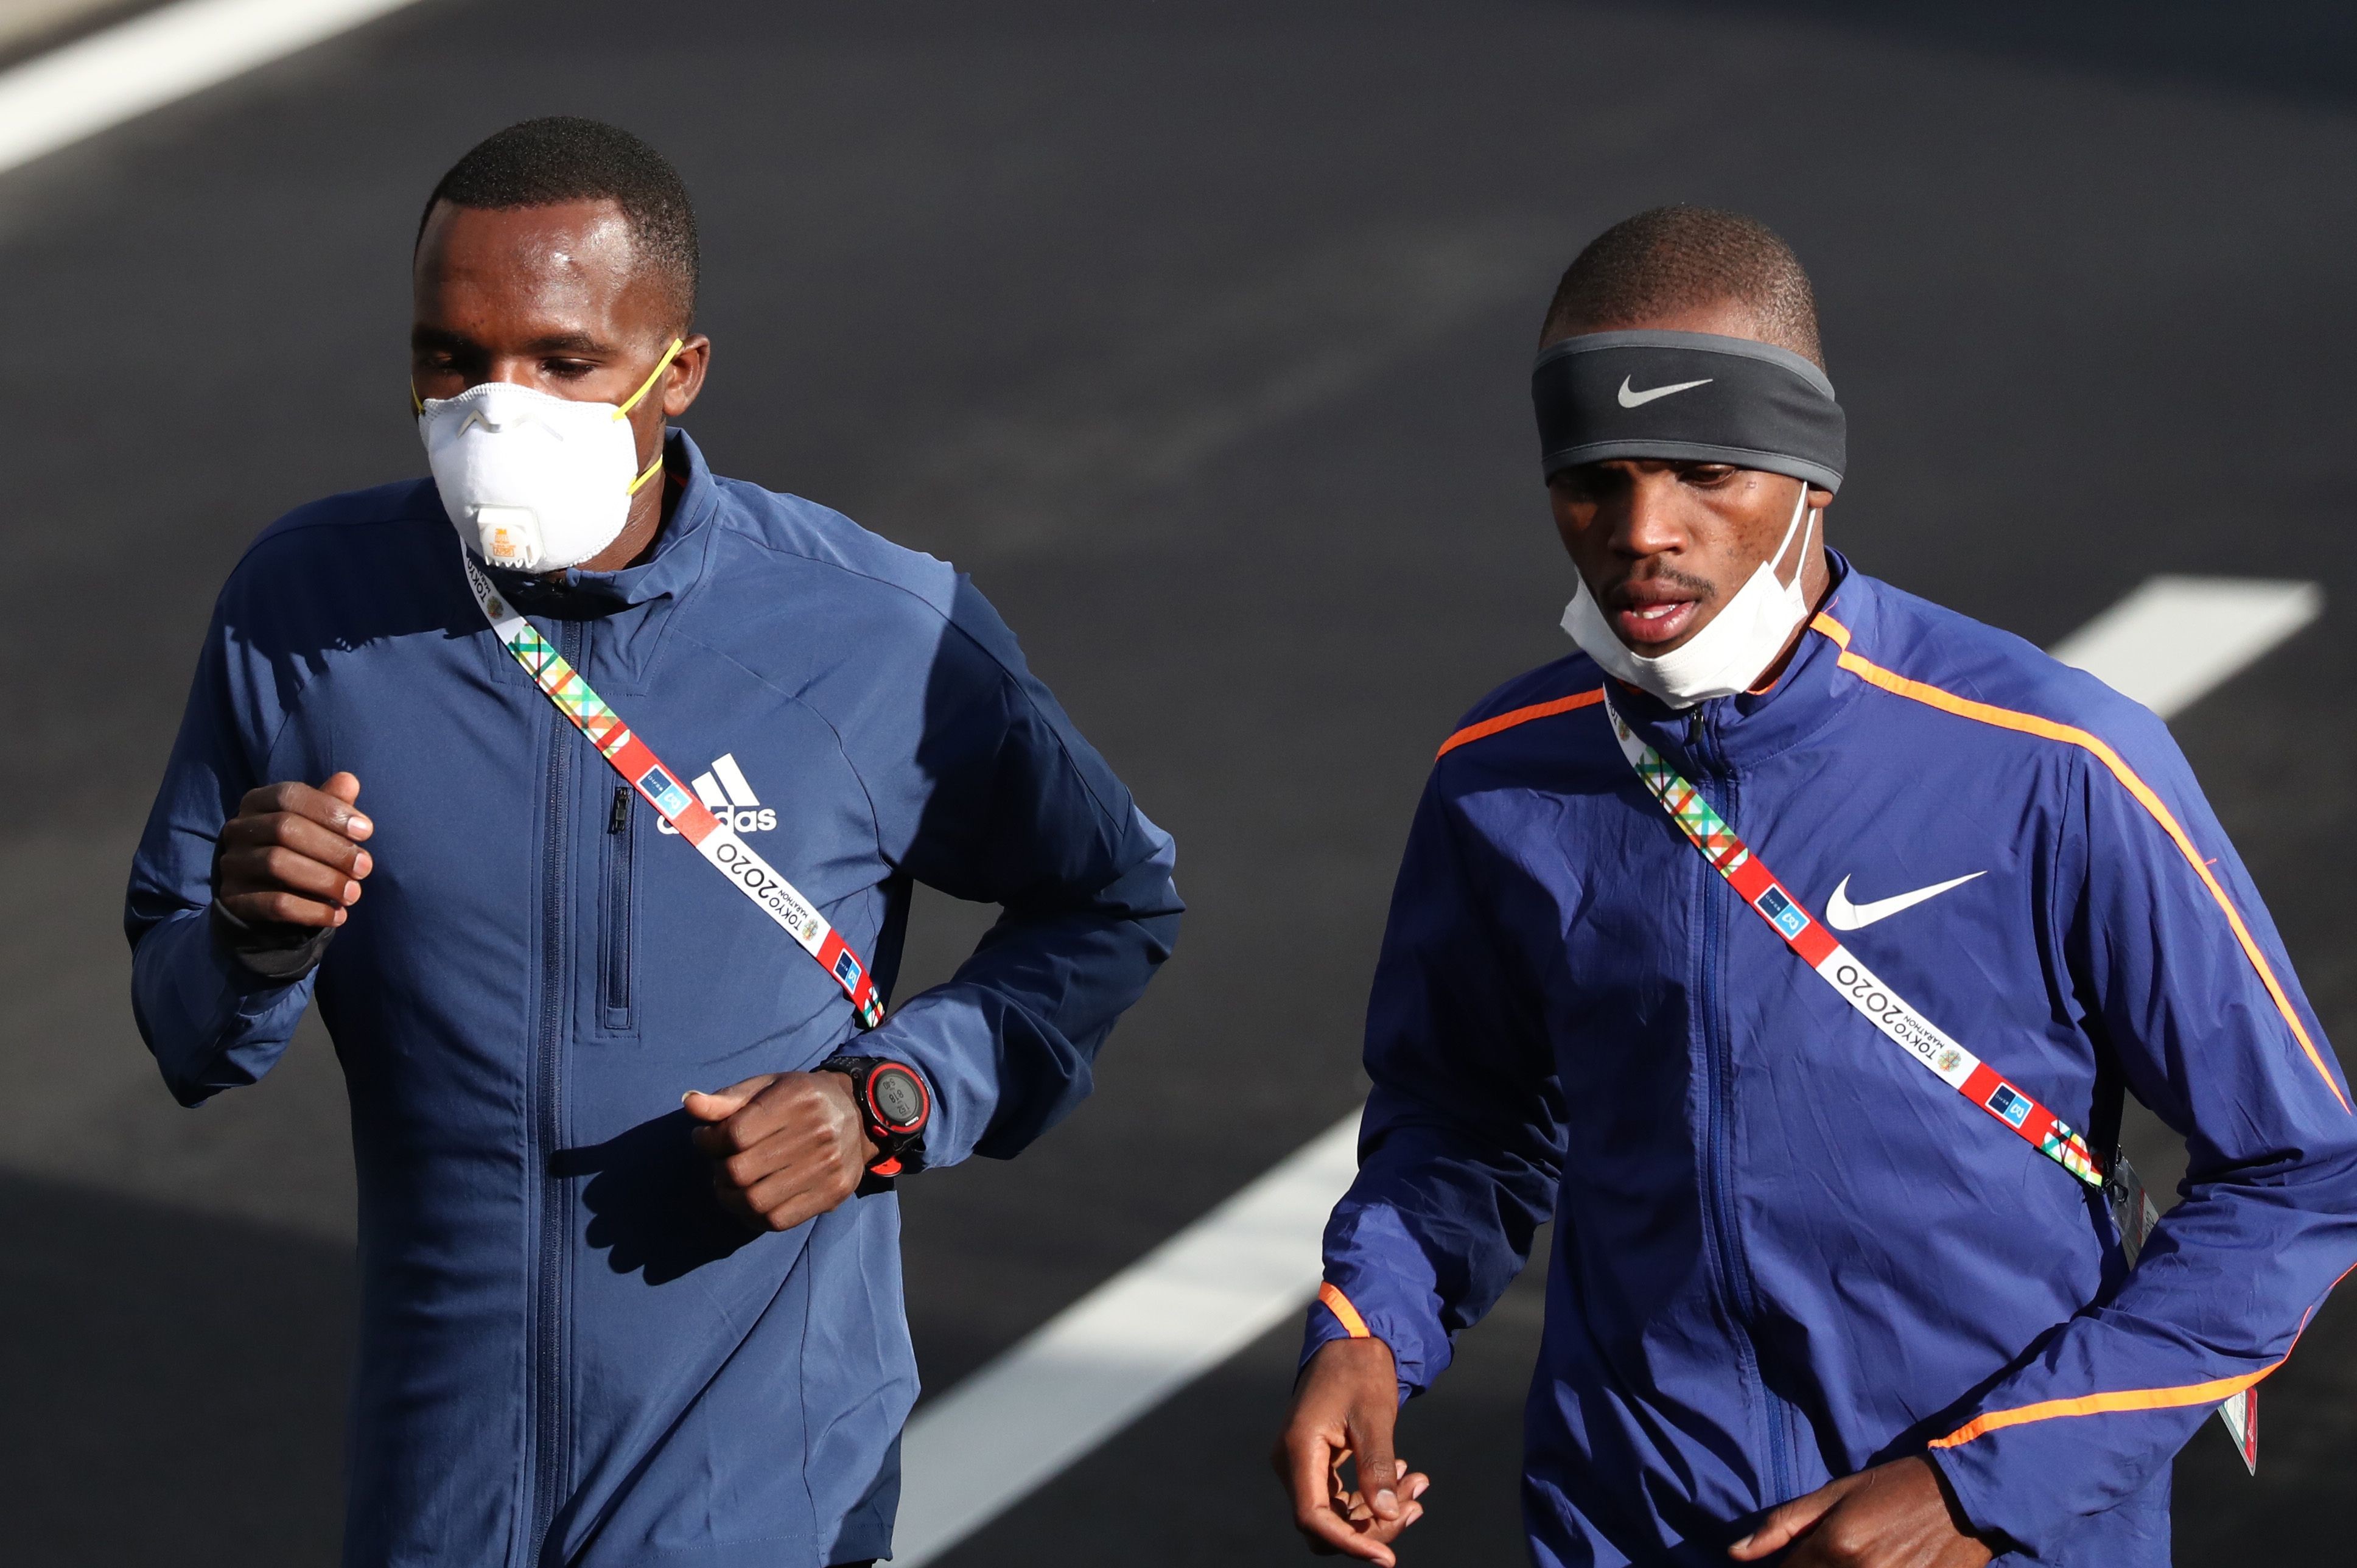 Foundation of Tokyo Marathon donates extra masks and disinfectants to schools and hospitals